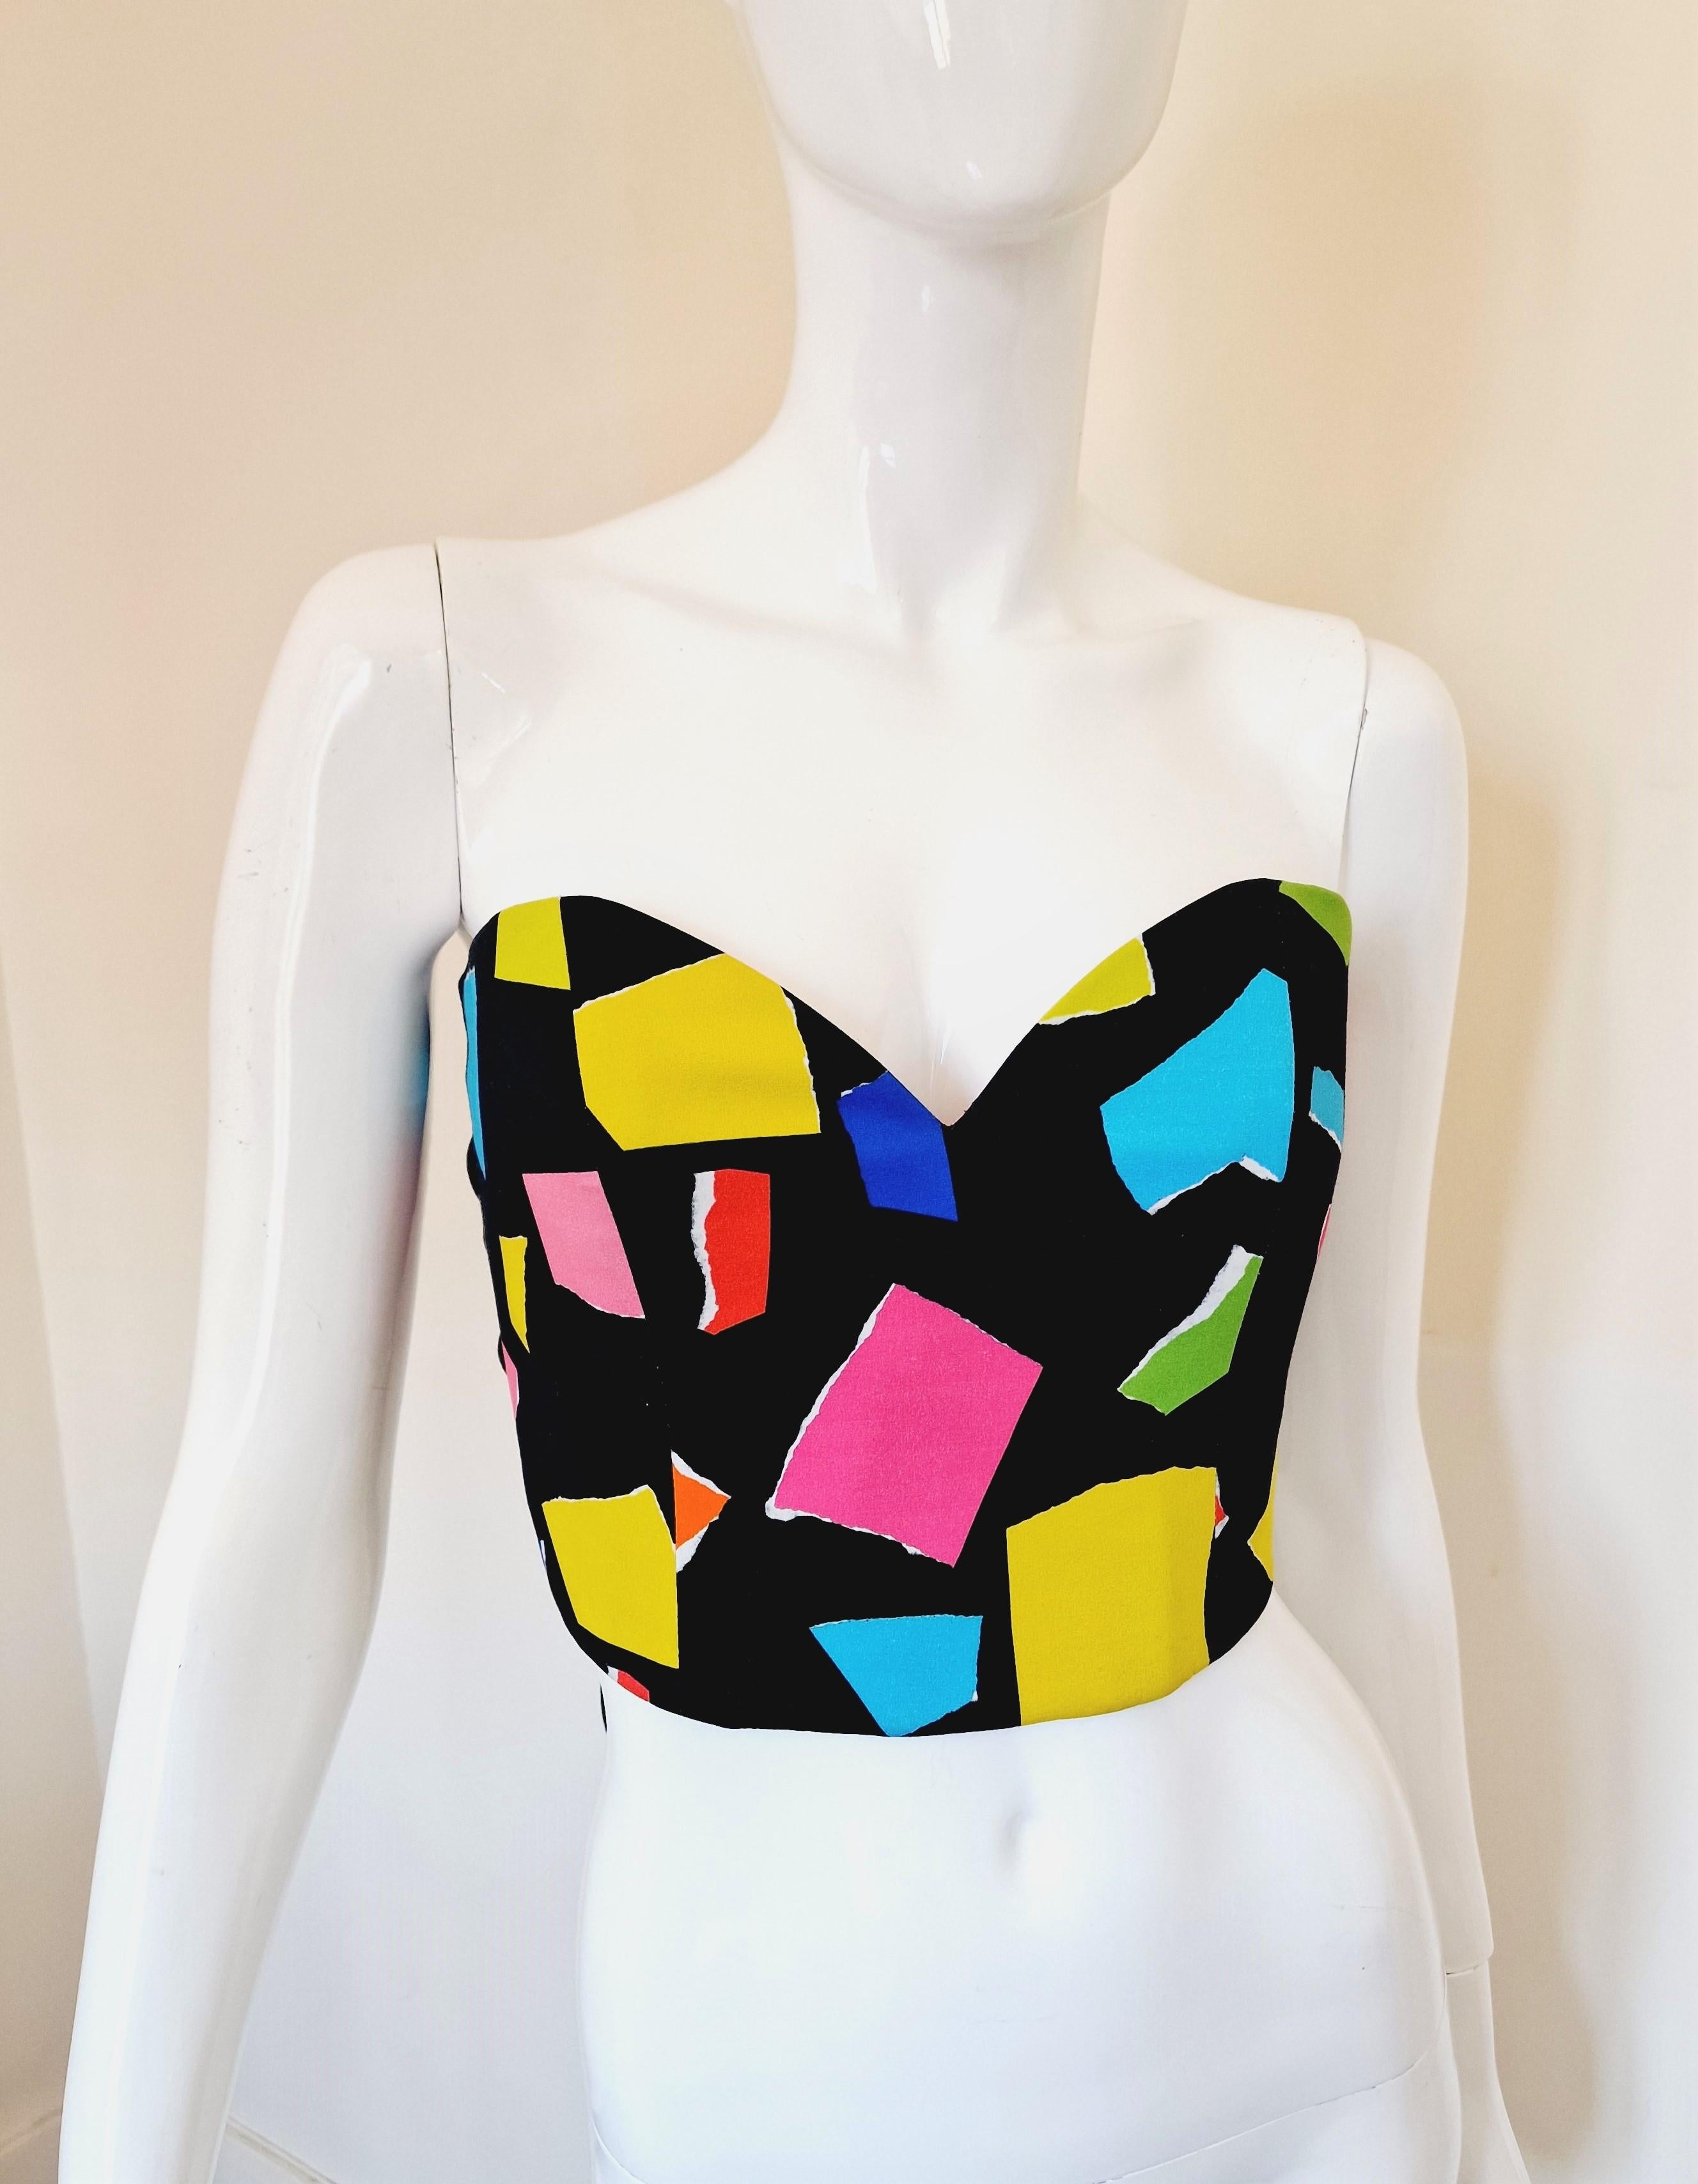 Moschino Couture structured bustier with boning and adjustable bow tie at back.
Designed by Jeremy Scott.
Black and multicolor abstract print with sweetheart neckline and tie back. 
Boned at front.
Fastens at back with cloth covered elastic on